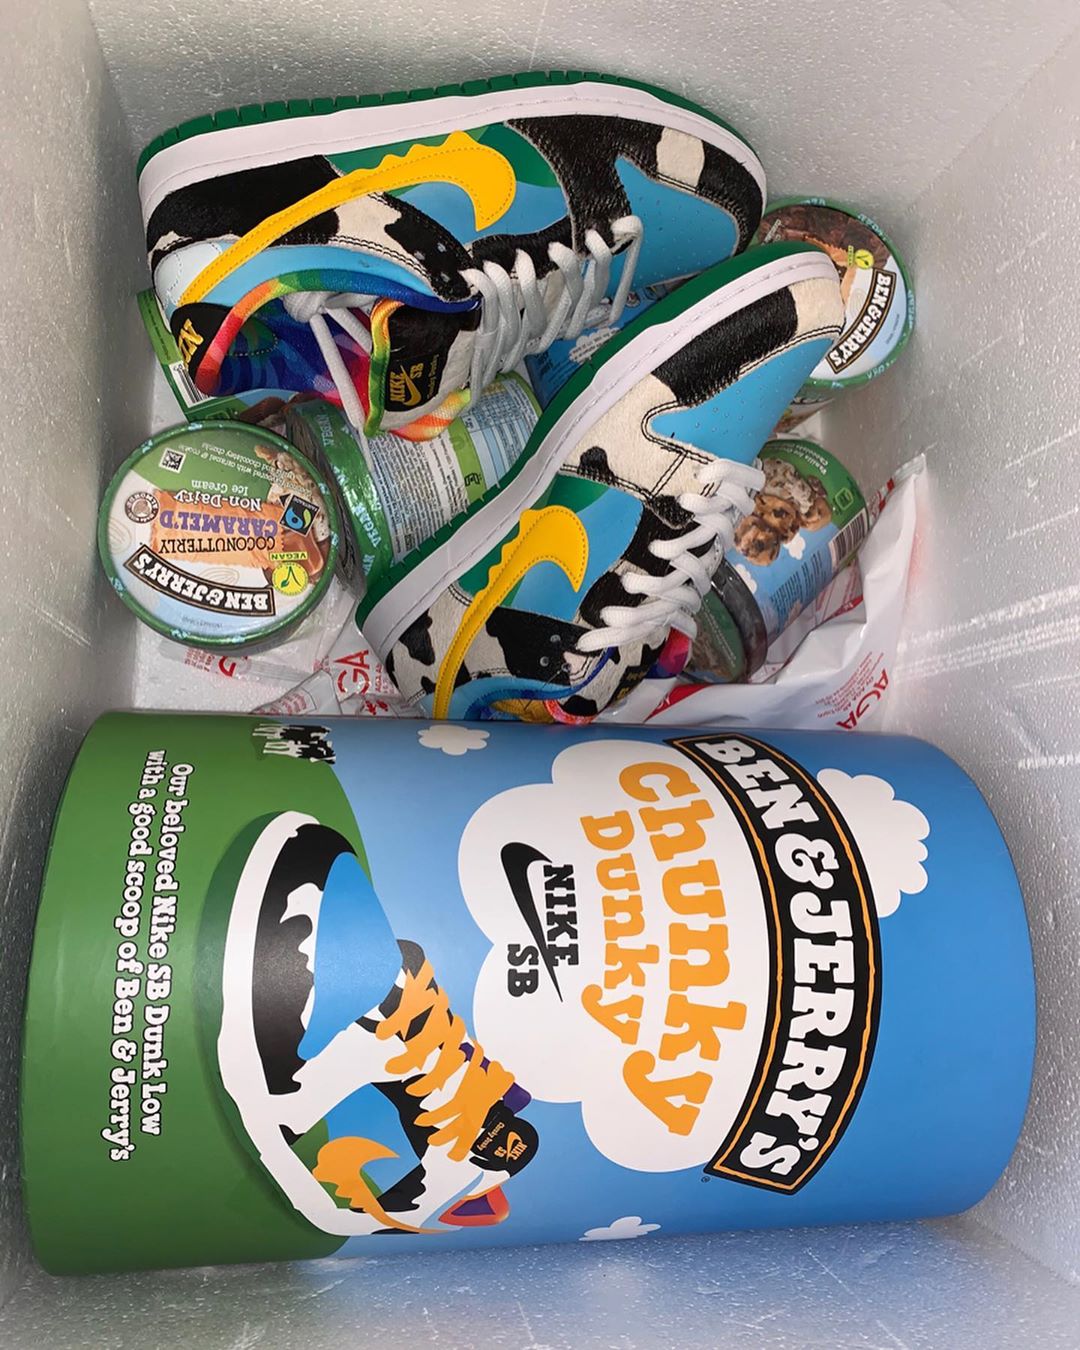 skate shops selling ben and jerry's